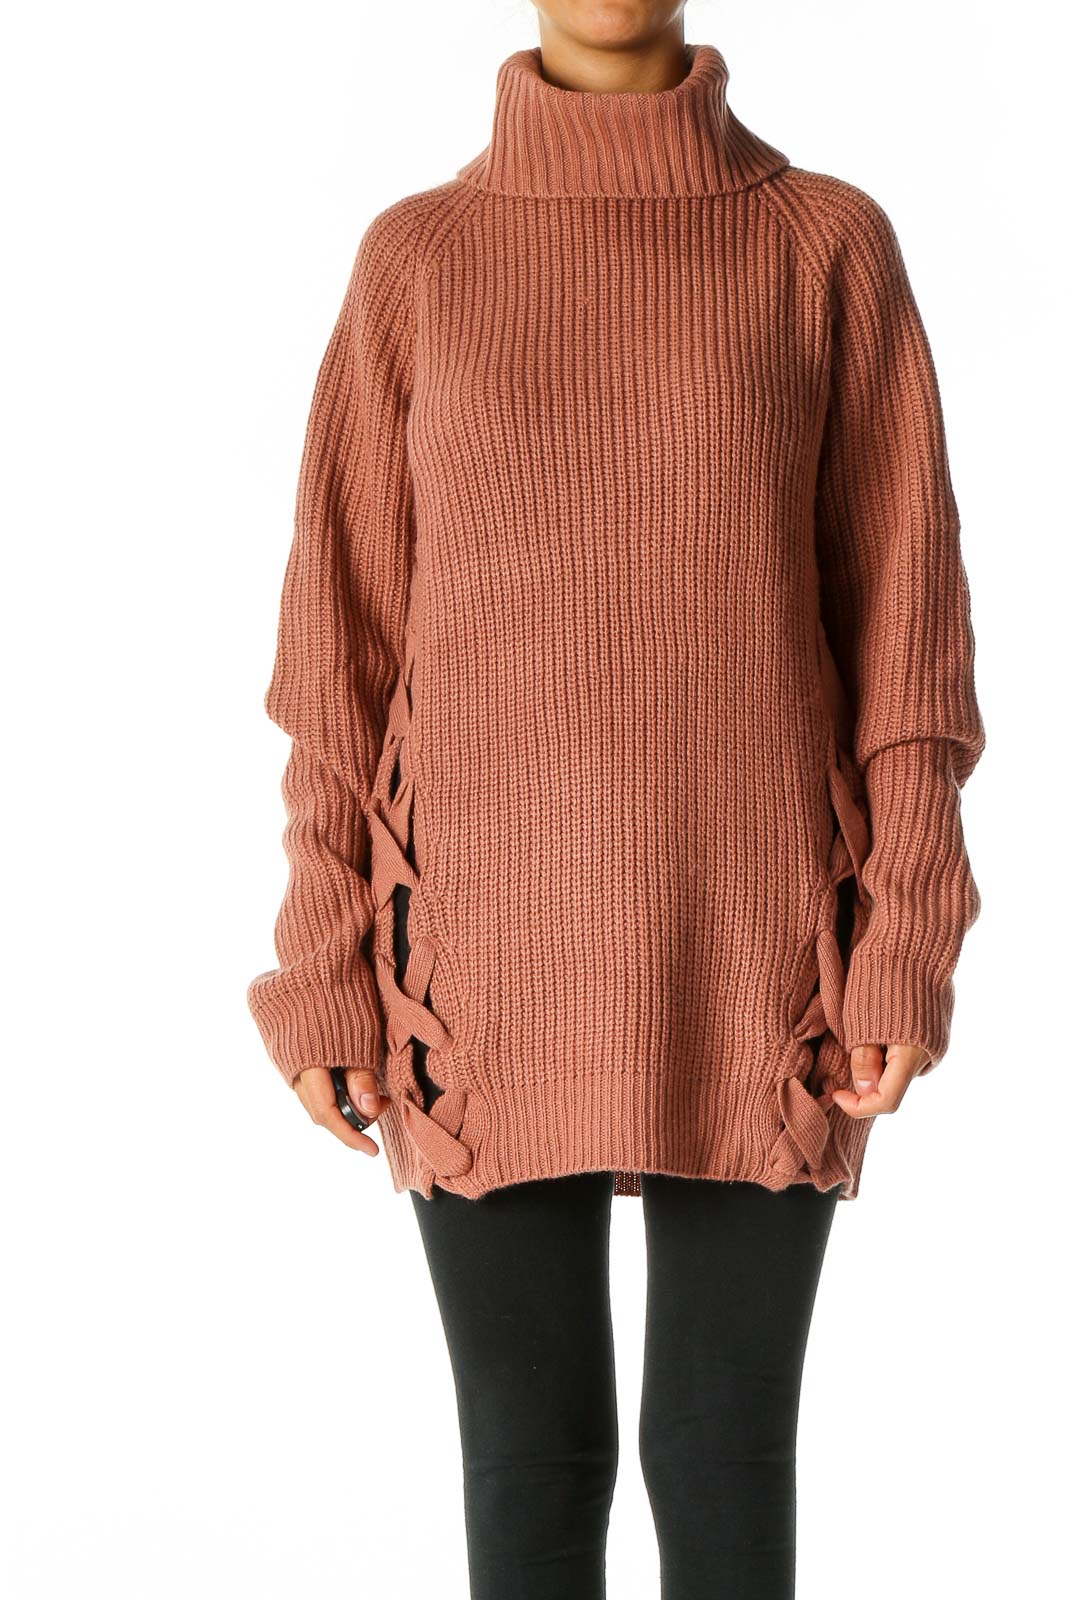 Brown Textured All Day Wear Sweater Front